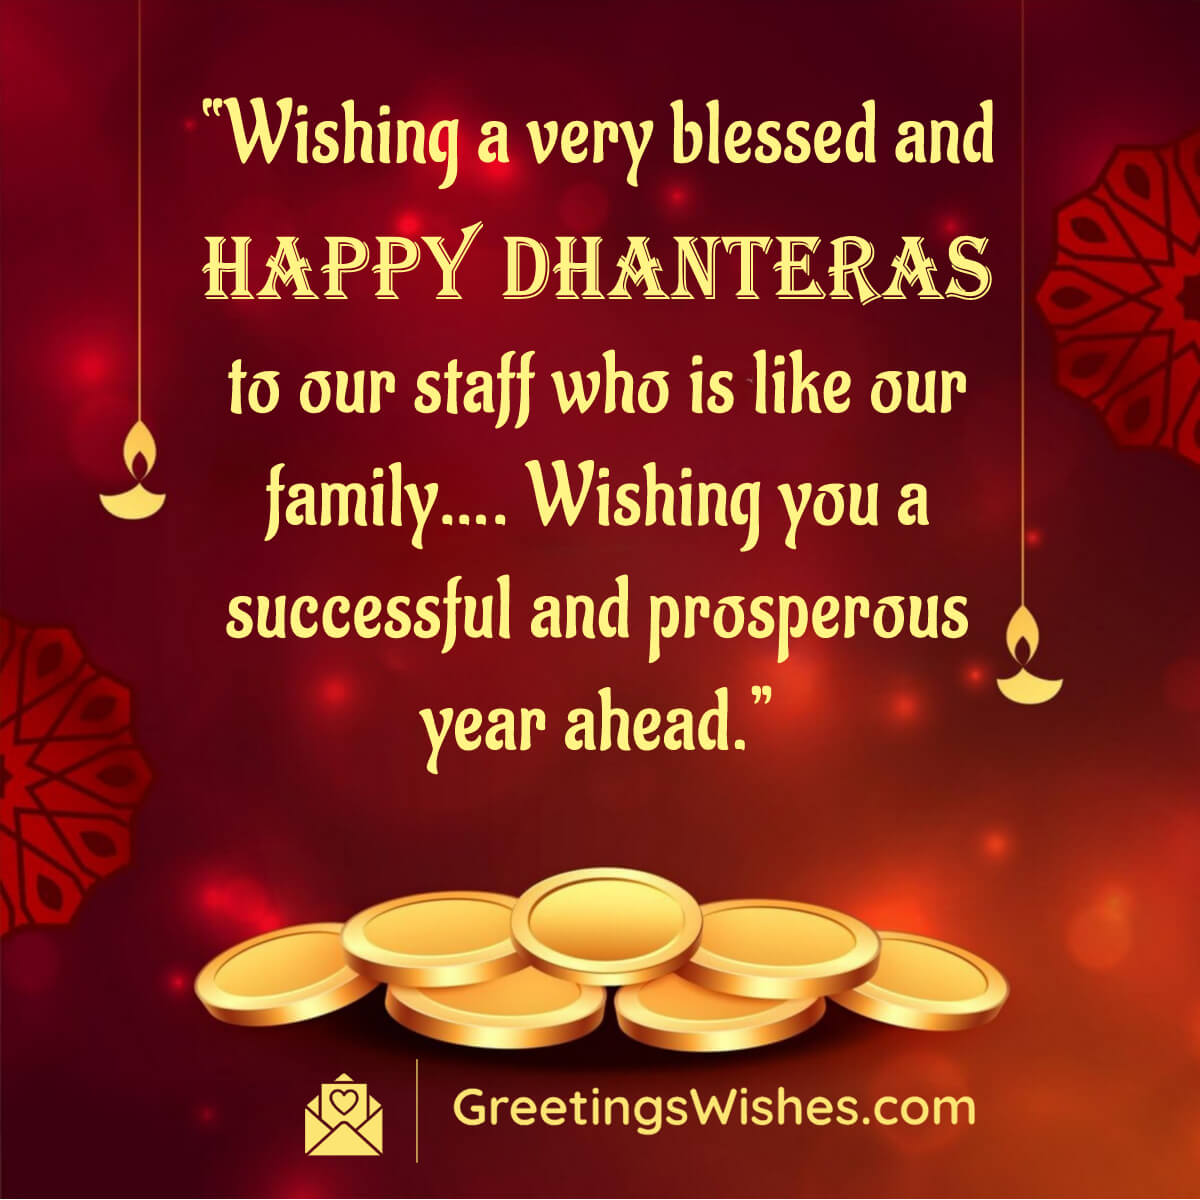 Dhanteras Cards For Employees